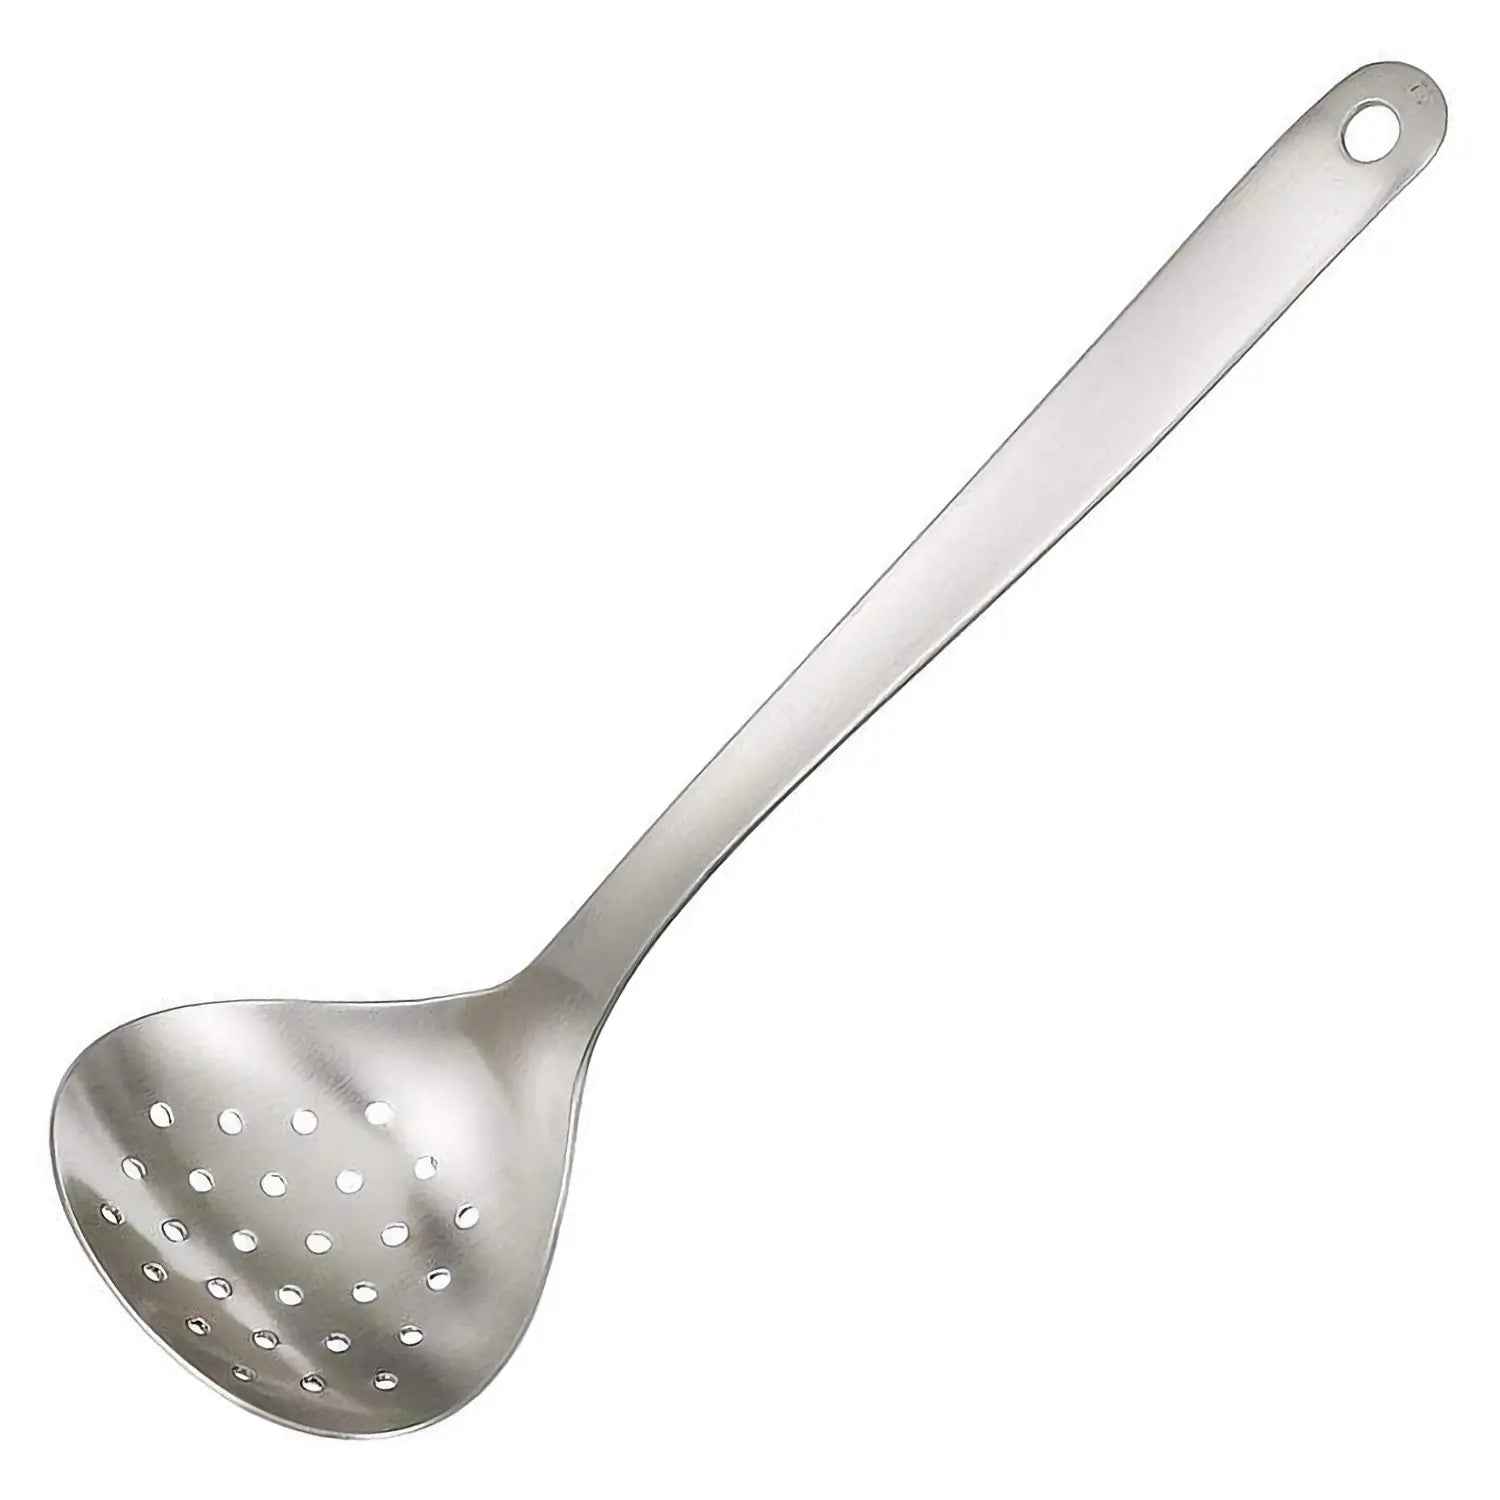 Allspice Stainless Steel Double Sided Measuring Spoon- Teaspoon and Tablespoon